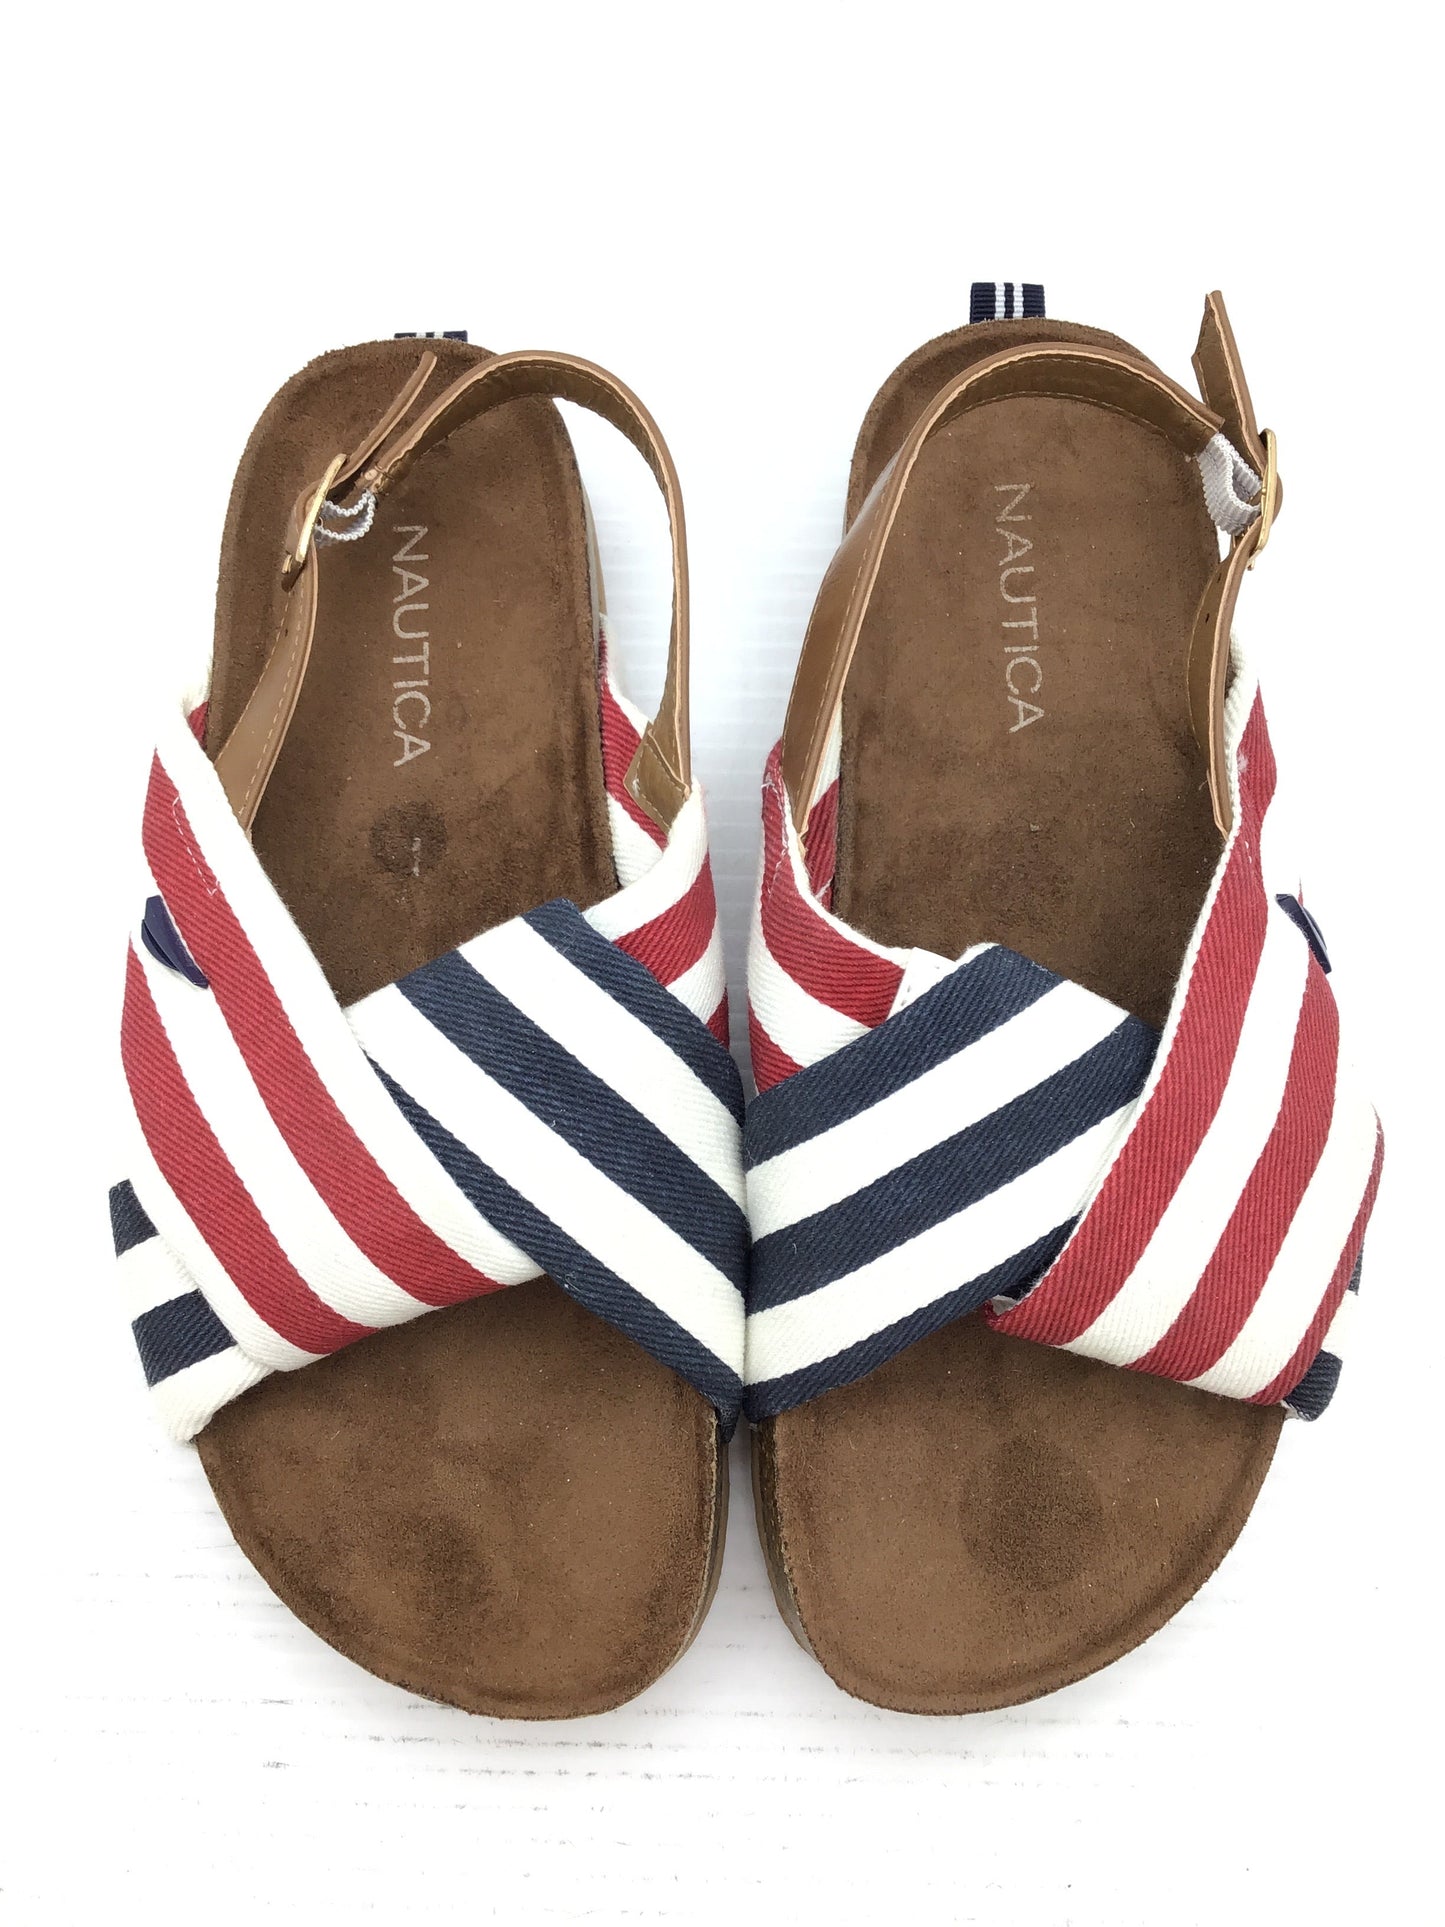 Sandals Flats By Nautica  Size: 8